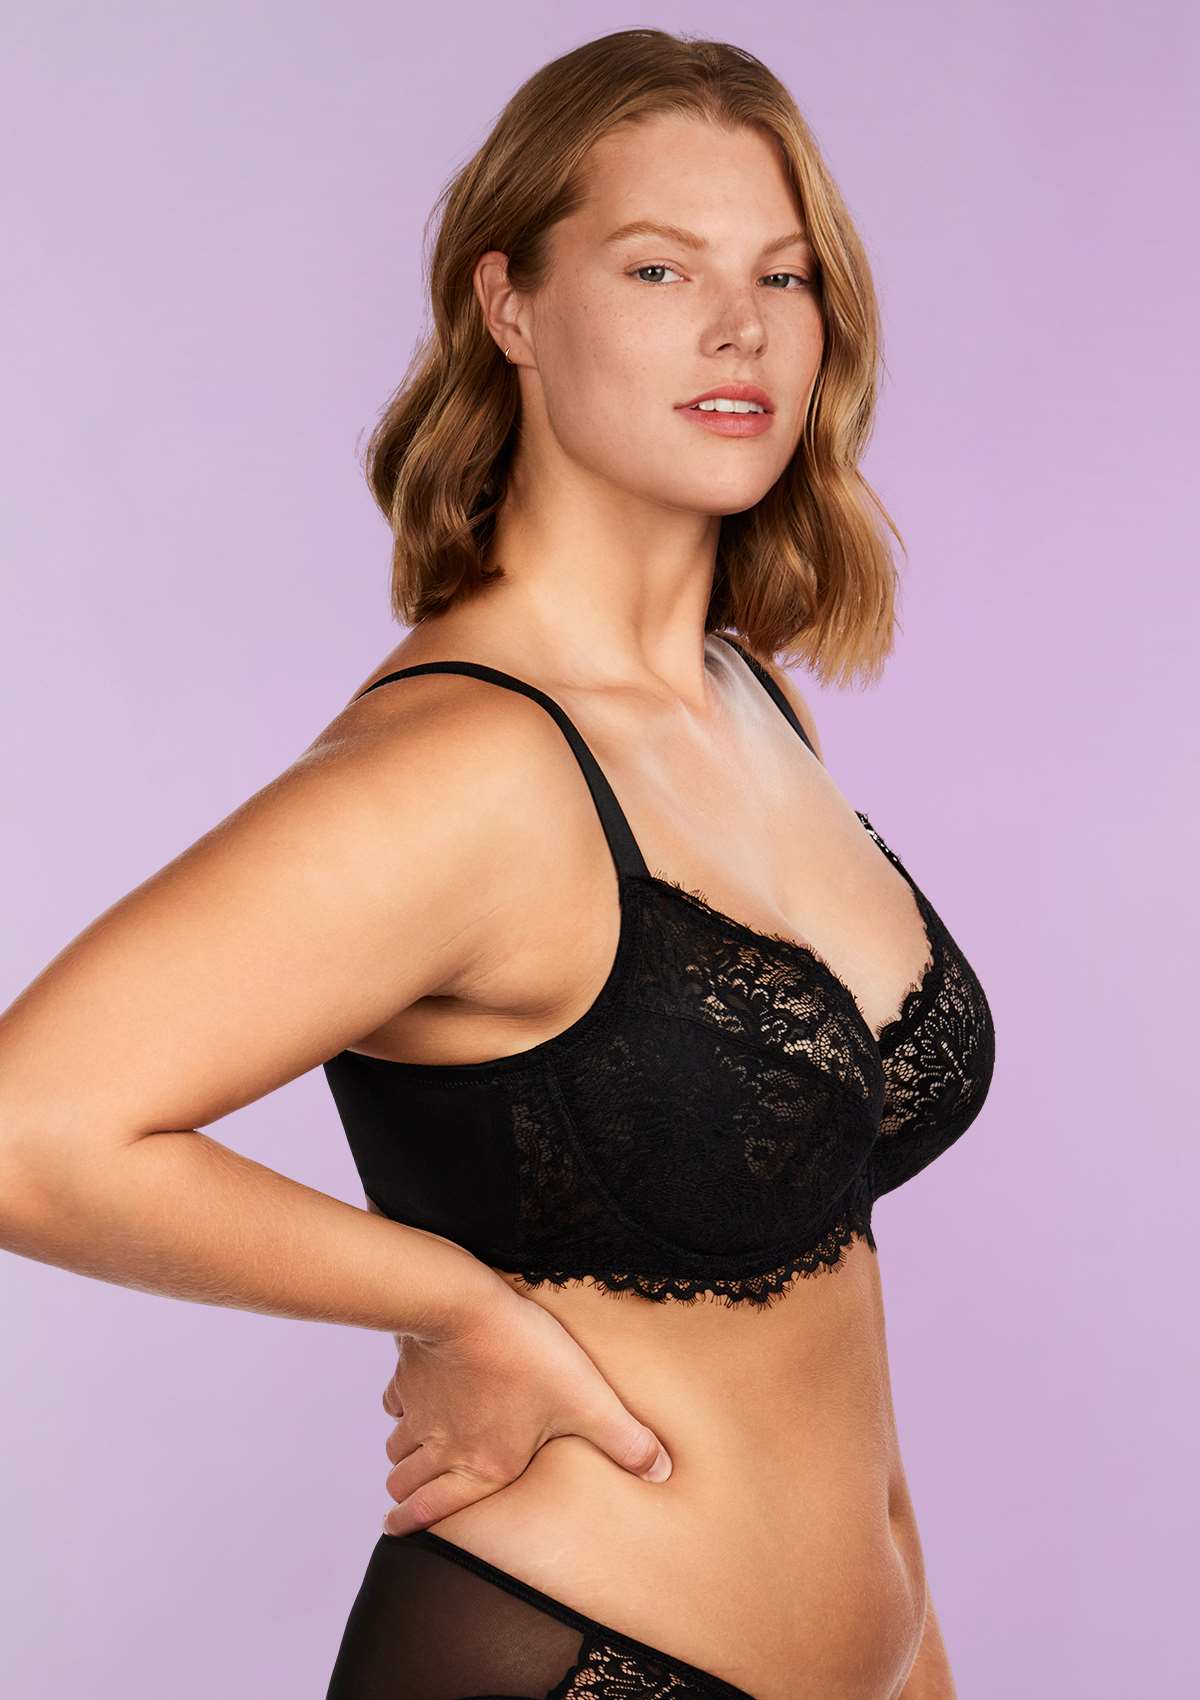 HSIA Sunflower Underwire Lace Bra: Unlined Full Coverage Support Bra - Black / 42 / D